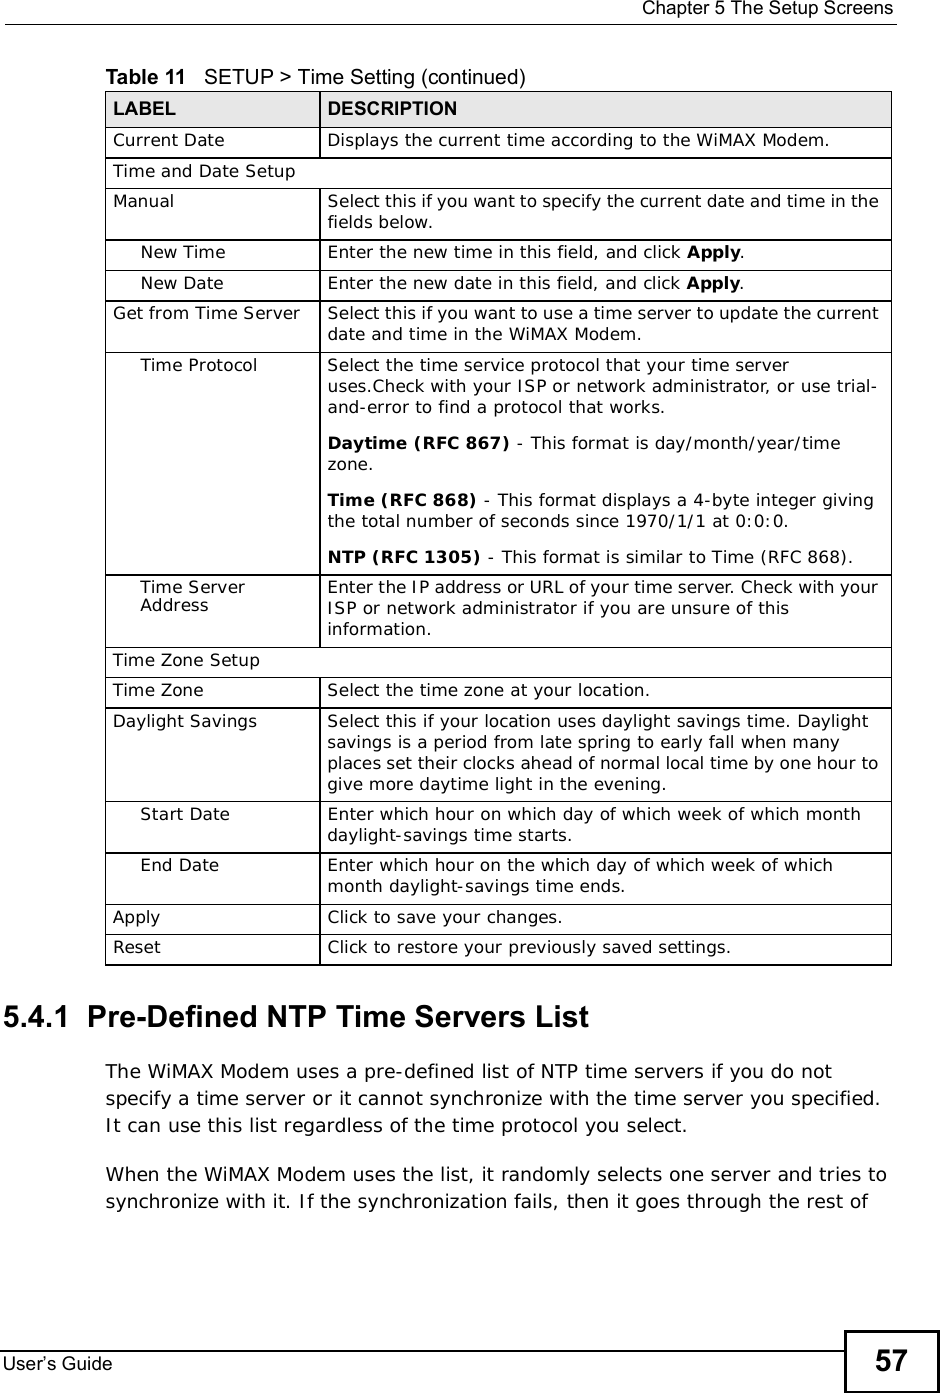  Chapter 5The Setup ScreensUser s Guide 575.4.1  Pre-Defined NTP Time Servers ListThe WiMAX Modem uses a pre-defined list of NTP time servers if you do not specify a time server or it cannot synchronize with the time server you specified. It can use this list regardless of the time protocol you select.When the WiMAX Modem uses the list, it randomly selects one server and tries to synchronize with it. If the synchronization fails, then it goes through the rest of Current DateDisplays the current time according to the WiMAX Modem.Time and Date SetupManual Select this if you want to specify the current date and time in the fields below.New Time Enter the new time in this field, and click Apply.New Date Enter the new date in this field, and click Apply.Get from Time Server Select this if you want to use a time server to update the current date and time in the WiMAX Modem.Time ProtocolSelect the time service protocol that your time server uses.Check with your ISP or network administrator, or use trial-and-error to find a protocol that works.Daytime (RFC 867) - This format is day/month/year/time zone.Time (RFC 868) - This format displays a 4-byte integer giving the total number of seconds since 1970/1/1 at 0:0:0.NTP (RFC 1305) - This format is similar to Time (RFC 868).Time Server Address Enter the IP address or URL of your time server. Check with your ISP or network administrator if you are unsure of this information.Time Zone SetupTime ZoneSelect the time zone at your location.Daylight SavingsSelect this if your location uses daylight savings time. Daylight savings is a period from late spring to early fall when many places set their clocks ahead of normal local time by one hour to give more daytime light in the evening.Start DateEnter which hour on which day of which week of which month daylight-savings time starts.End DateEnter which hour on the which day of which week of which month daylight-savings time ends.Apply Click to save your changes.Reset Click to restore your previously saved settings.Table 11   SETUP &gt; Time Setting (continued)LABEL DESCRIPTION